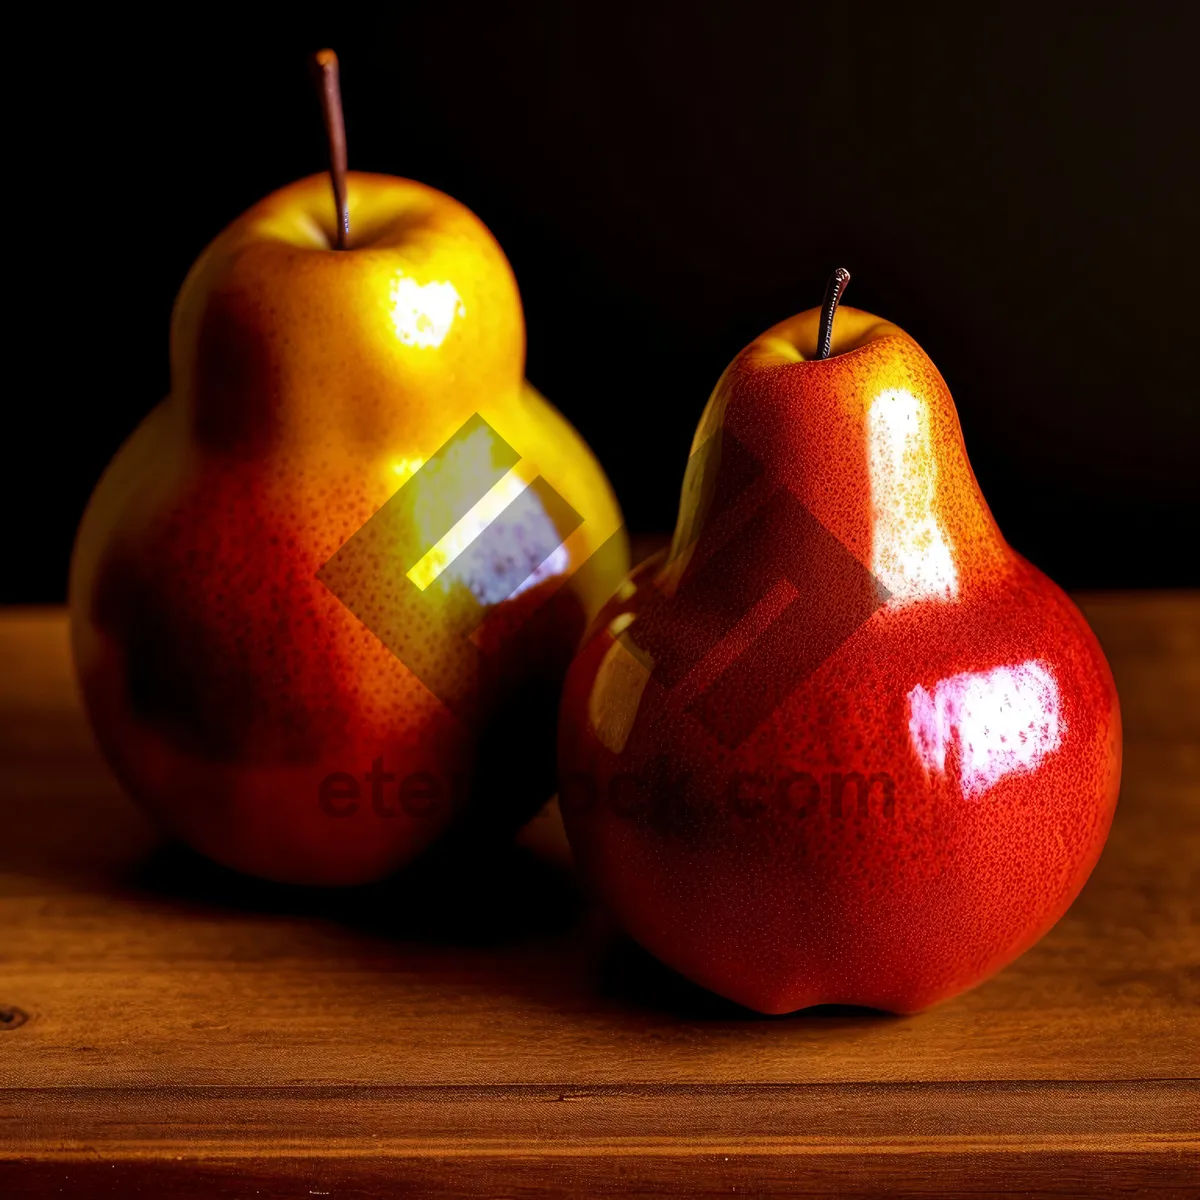 Picture of Delicious Ripe Pear: Healthy, Juicy, and Nutritious